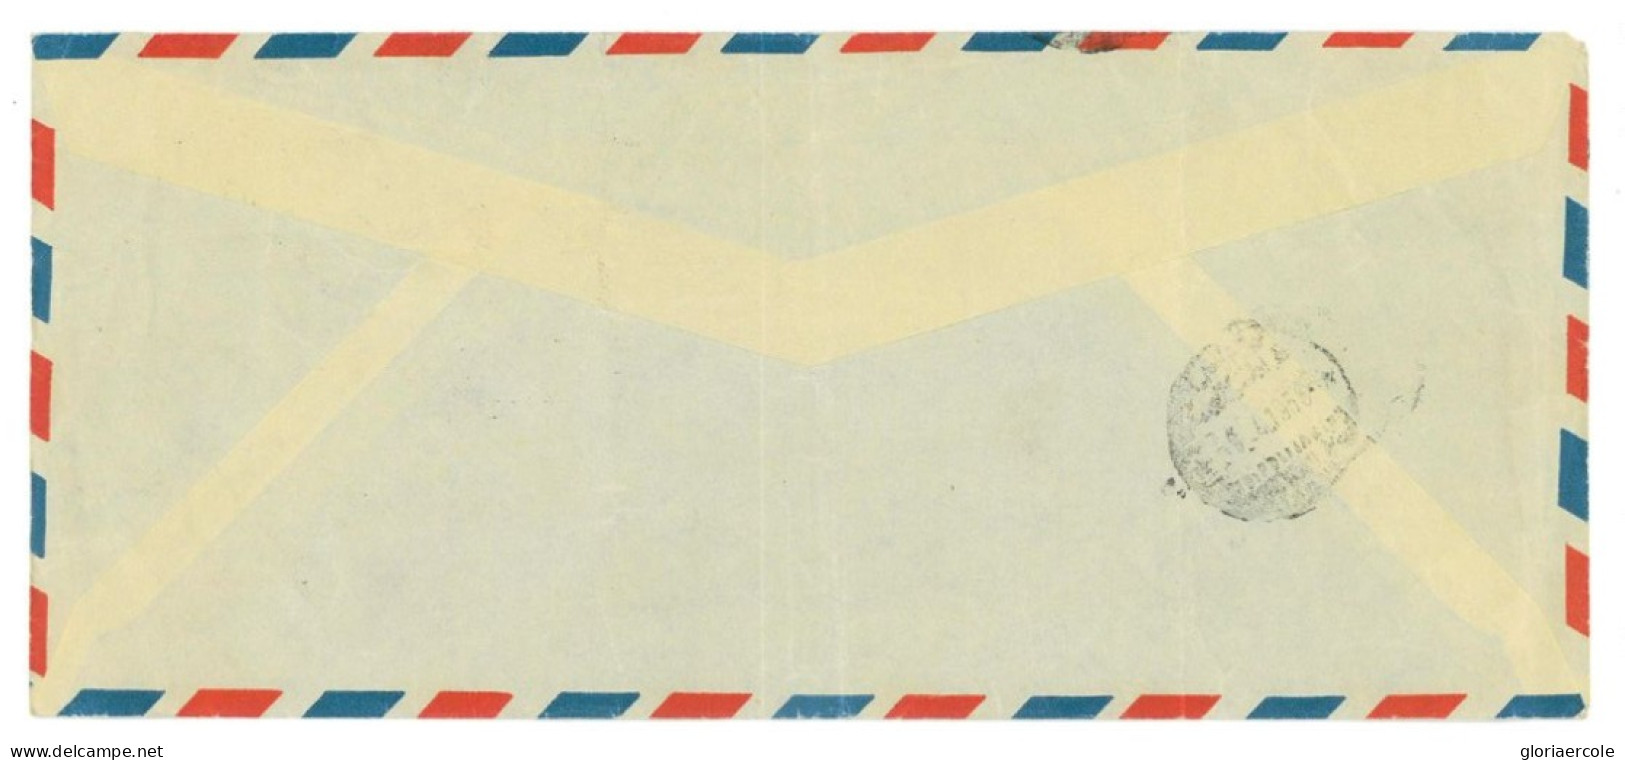 P3031 - MALTA, 1956 COVER GOING TO TRIPOLI, SCARCE RED BOXE HAND MARK, “RETURNED FOR ADDITIONAL POSTAGE”” - Malte (...-1964)